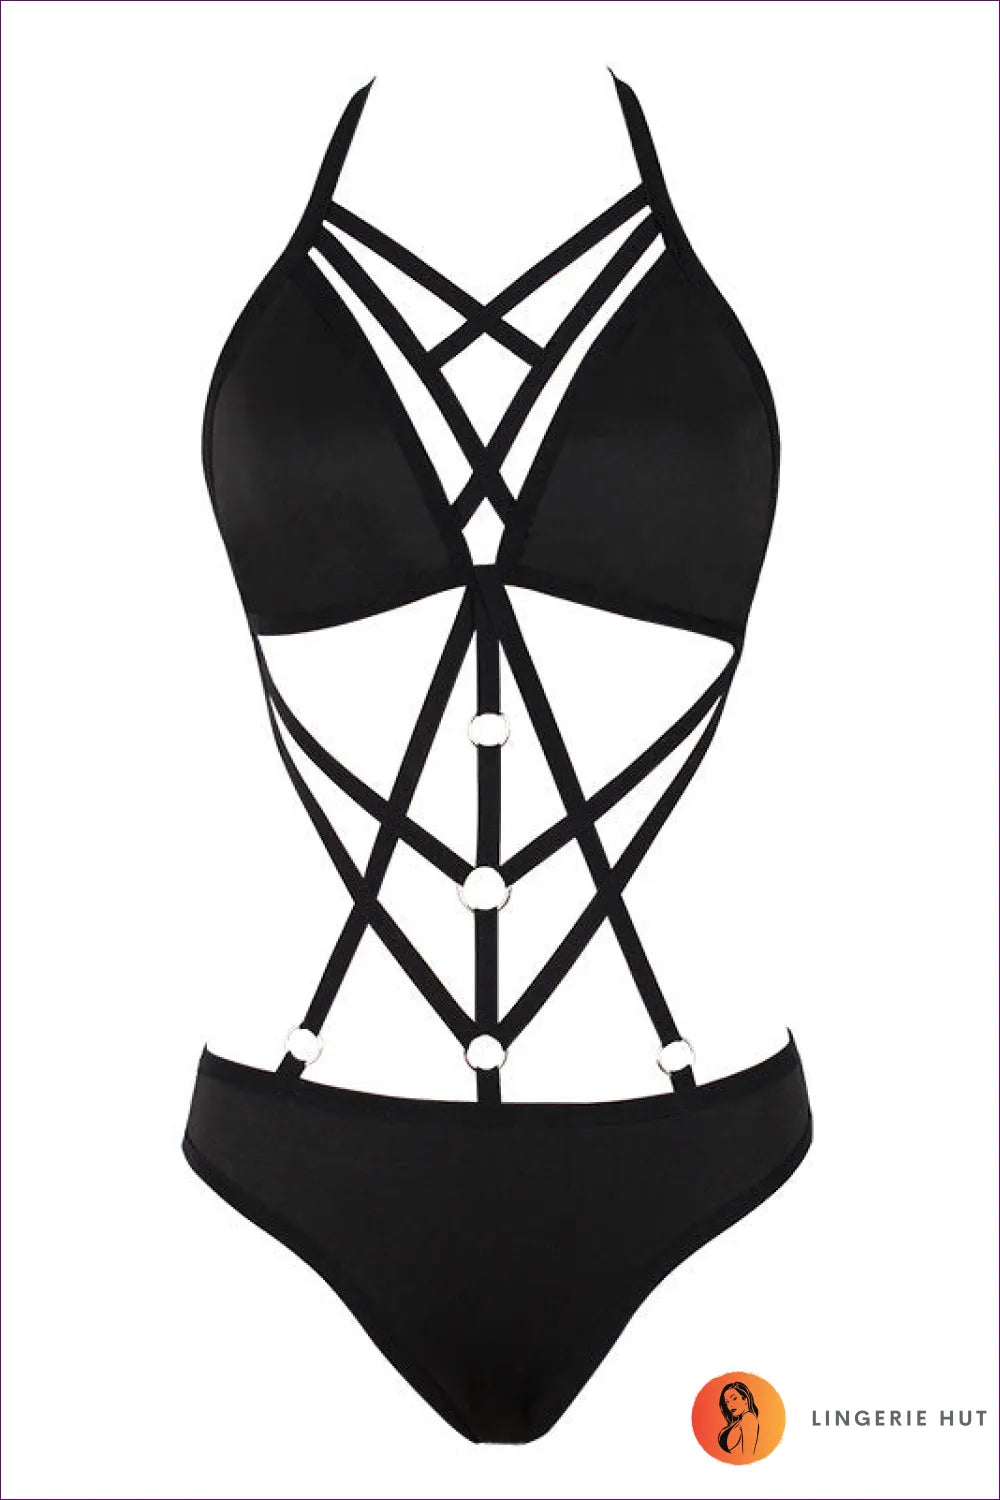 Make a Statement With Our Harness Cut Out Bodysuit. Edgy Cutouts, High-quality Construction, And Back Zipper